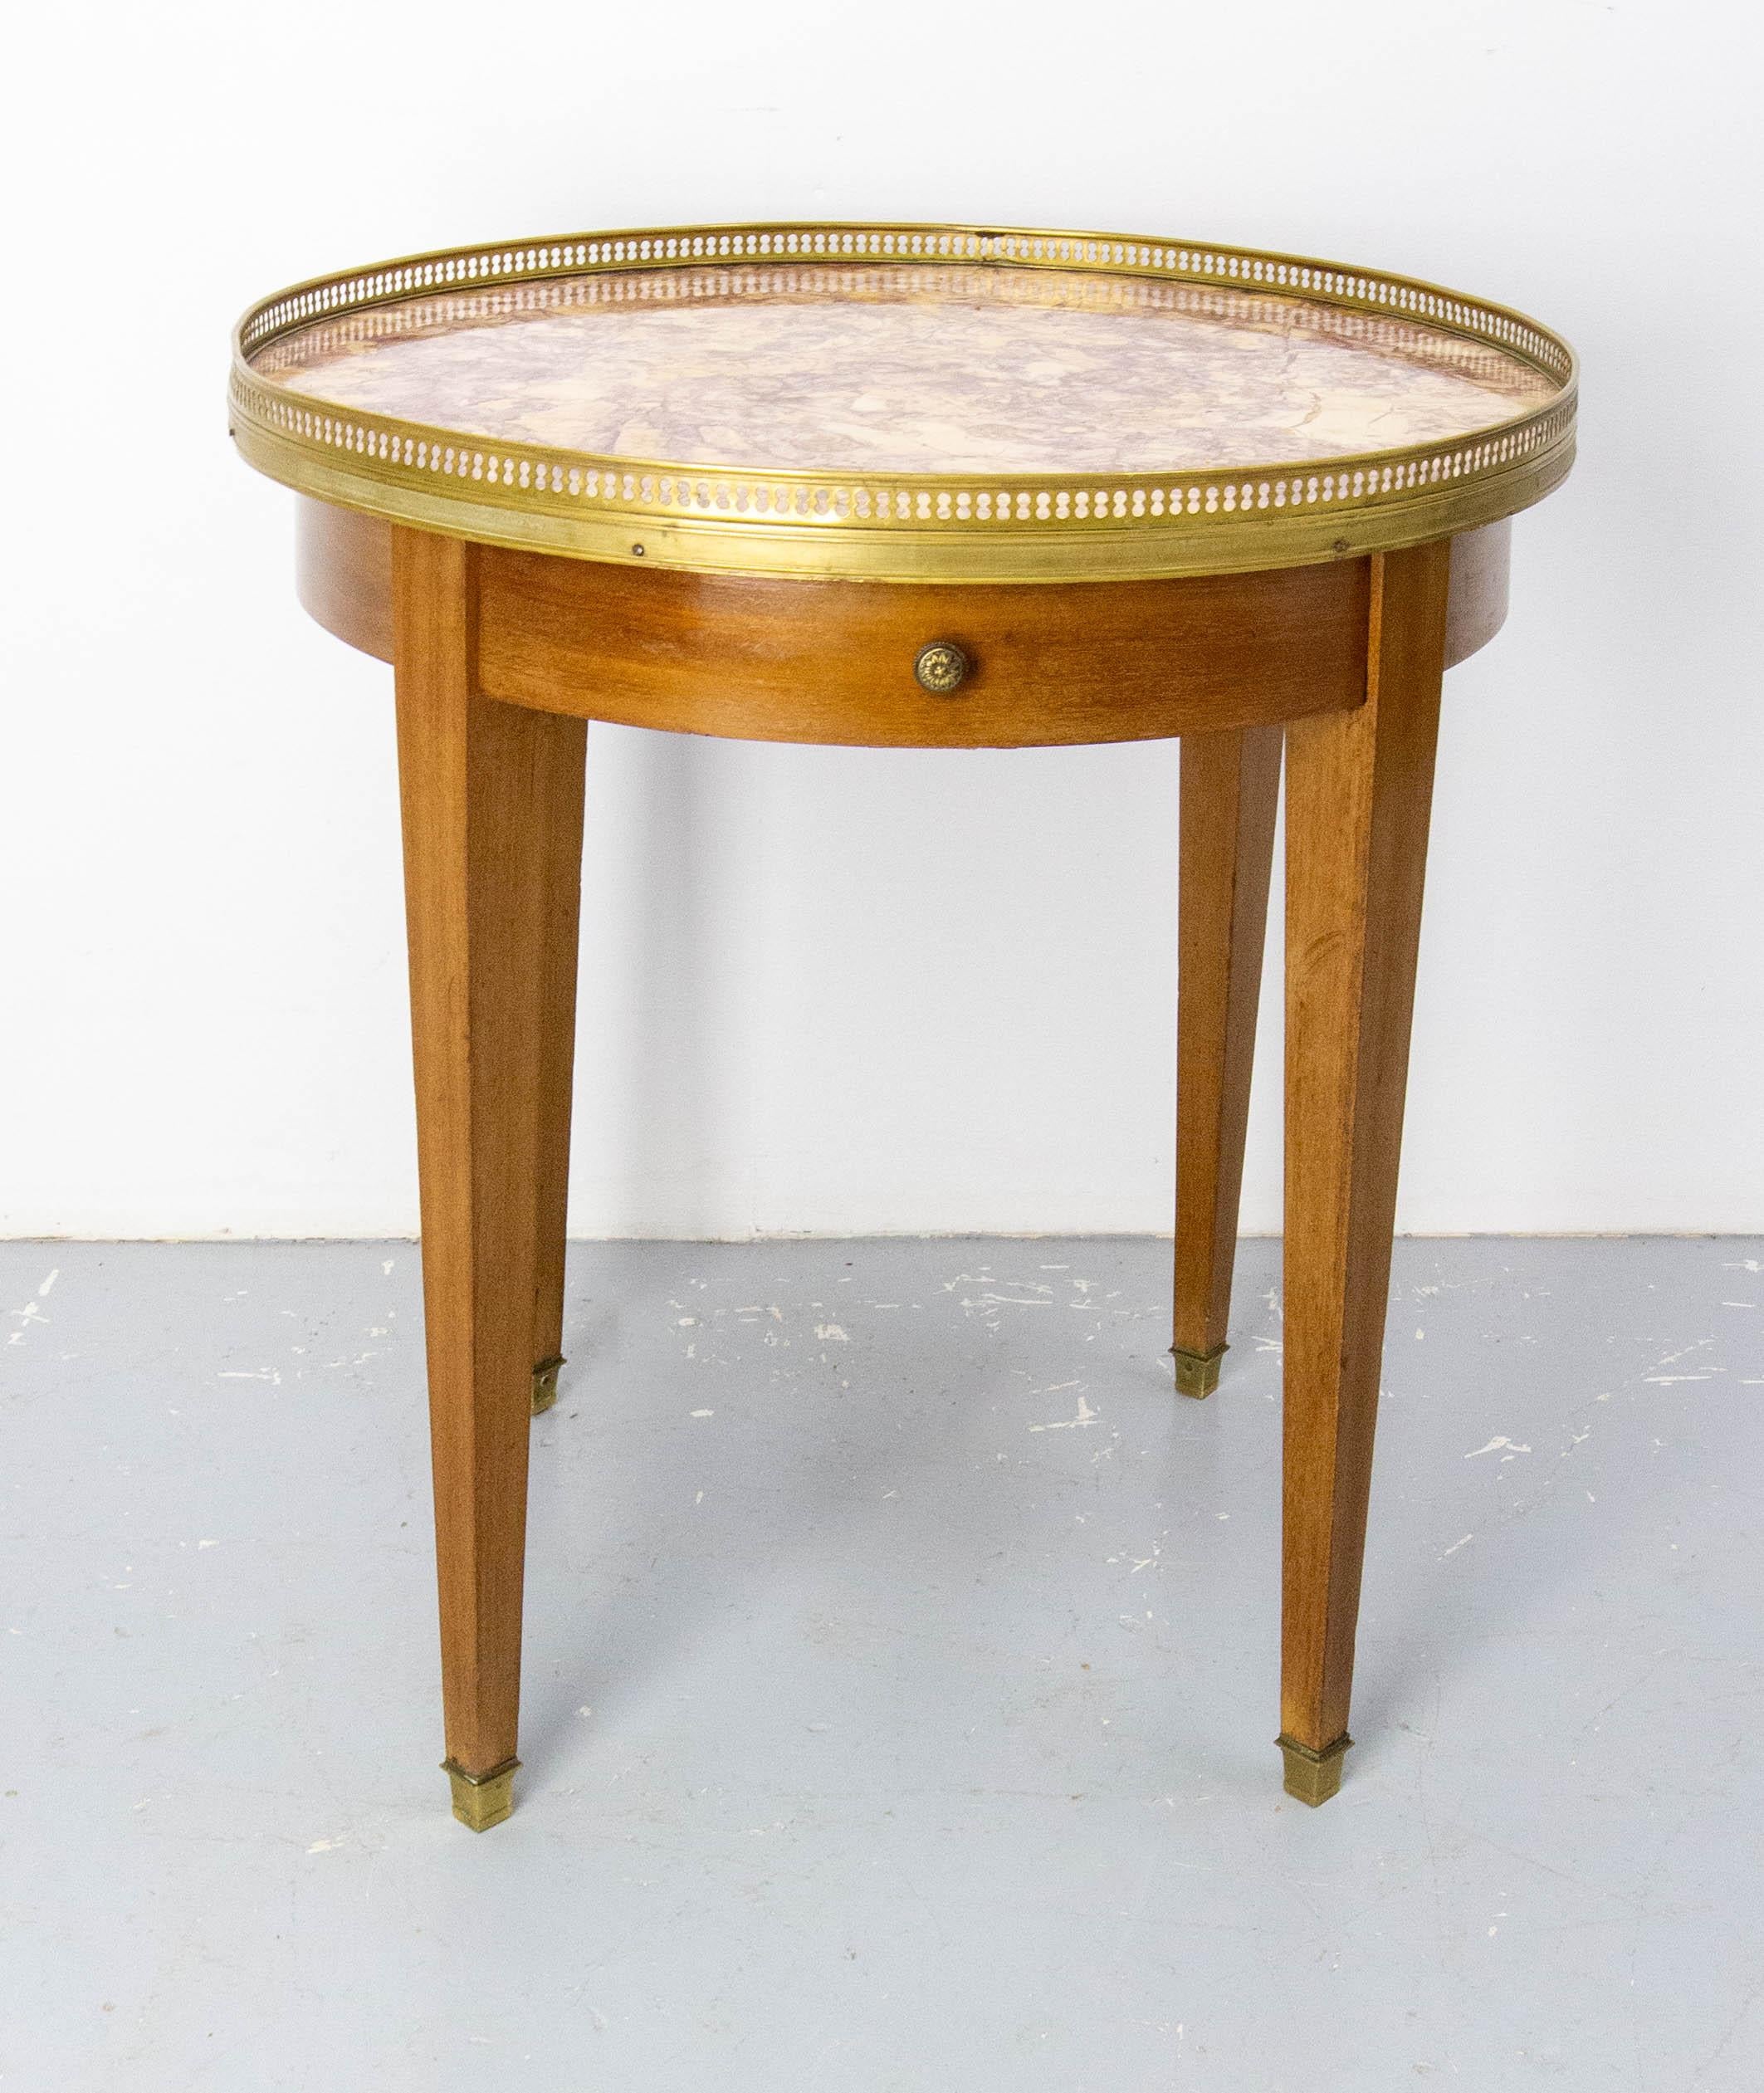 Pair of French Louis XVI style bouillotte table with purple and yellow marble-top. 
Brass gallery and brass feet 
One drawer.
The name “bouillotte” comes from a French gambling card game that became popular during the Revolution in the 18th century.